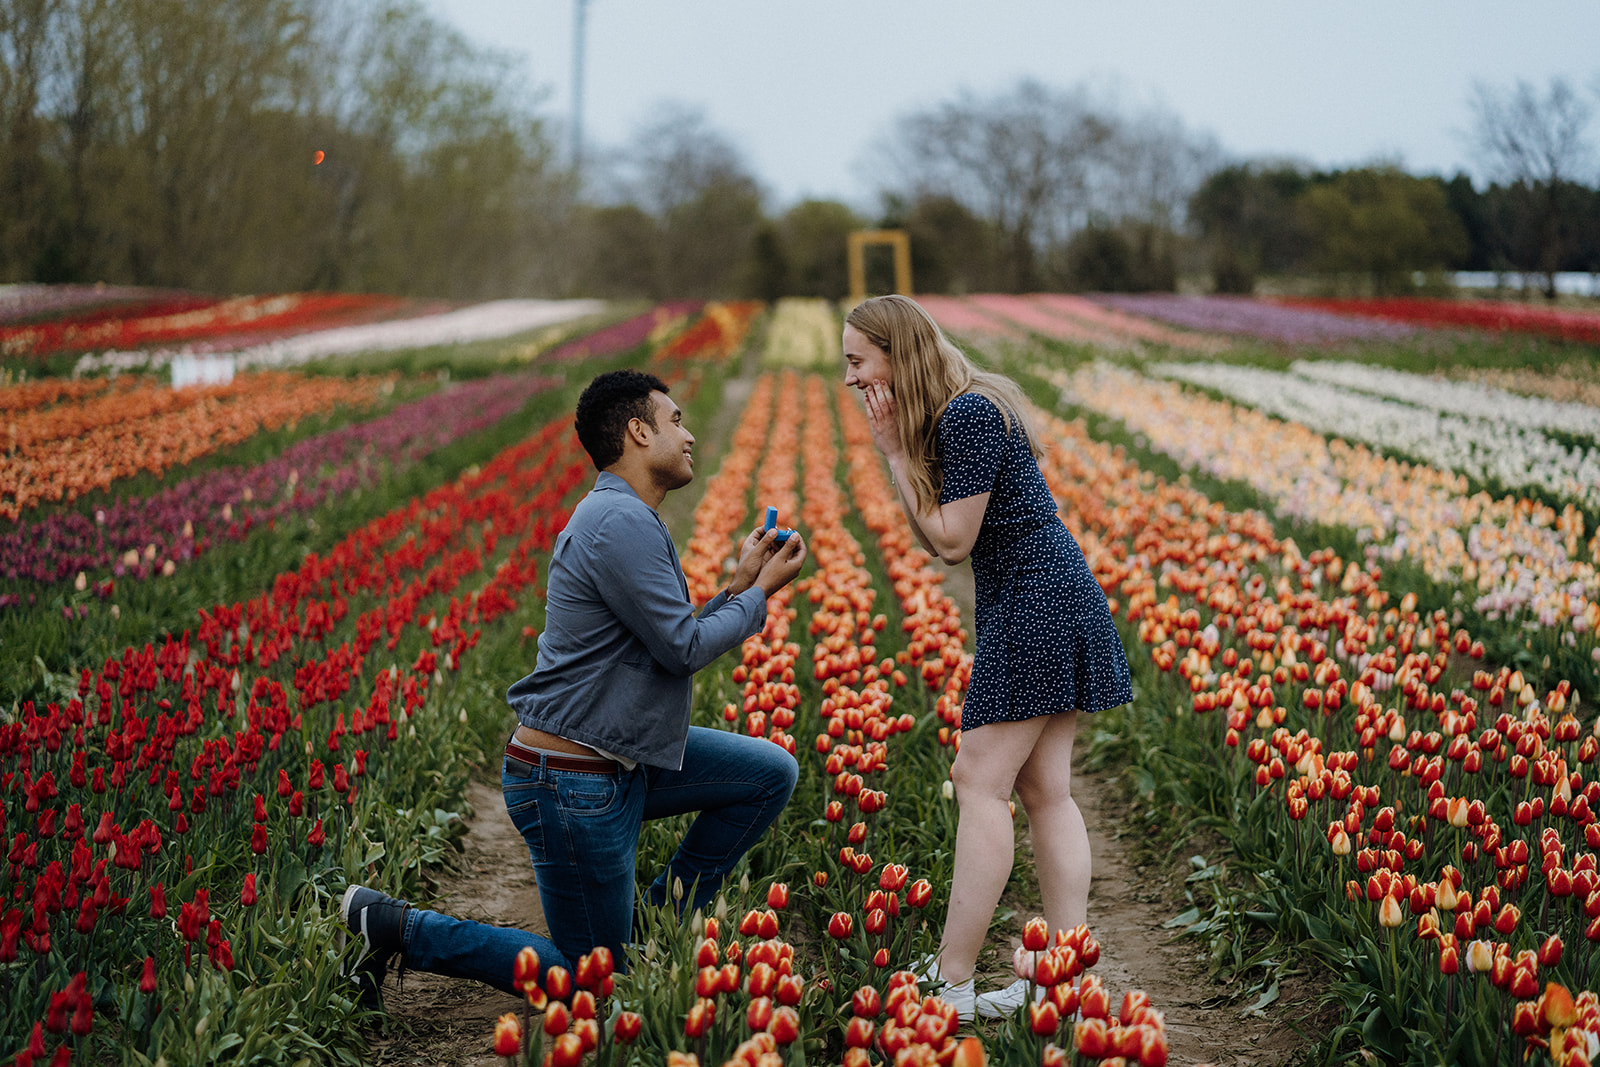 Man kneeling in tulips while his girlfriend looks at him smiling with her hands on her cheeks bending down.